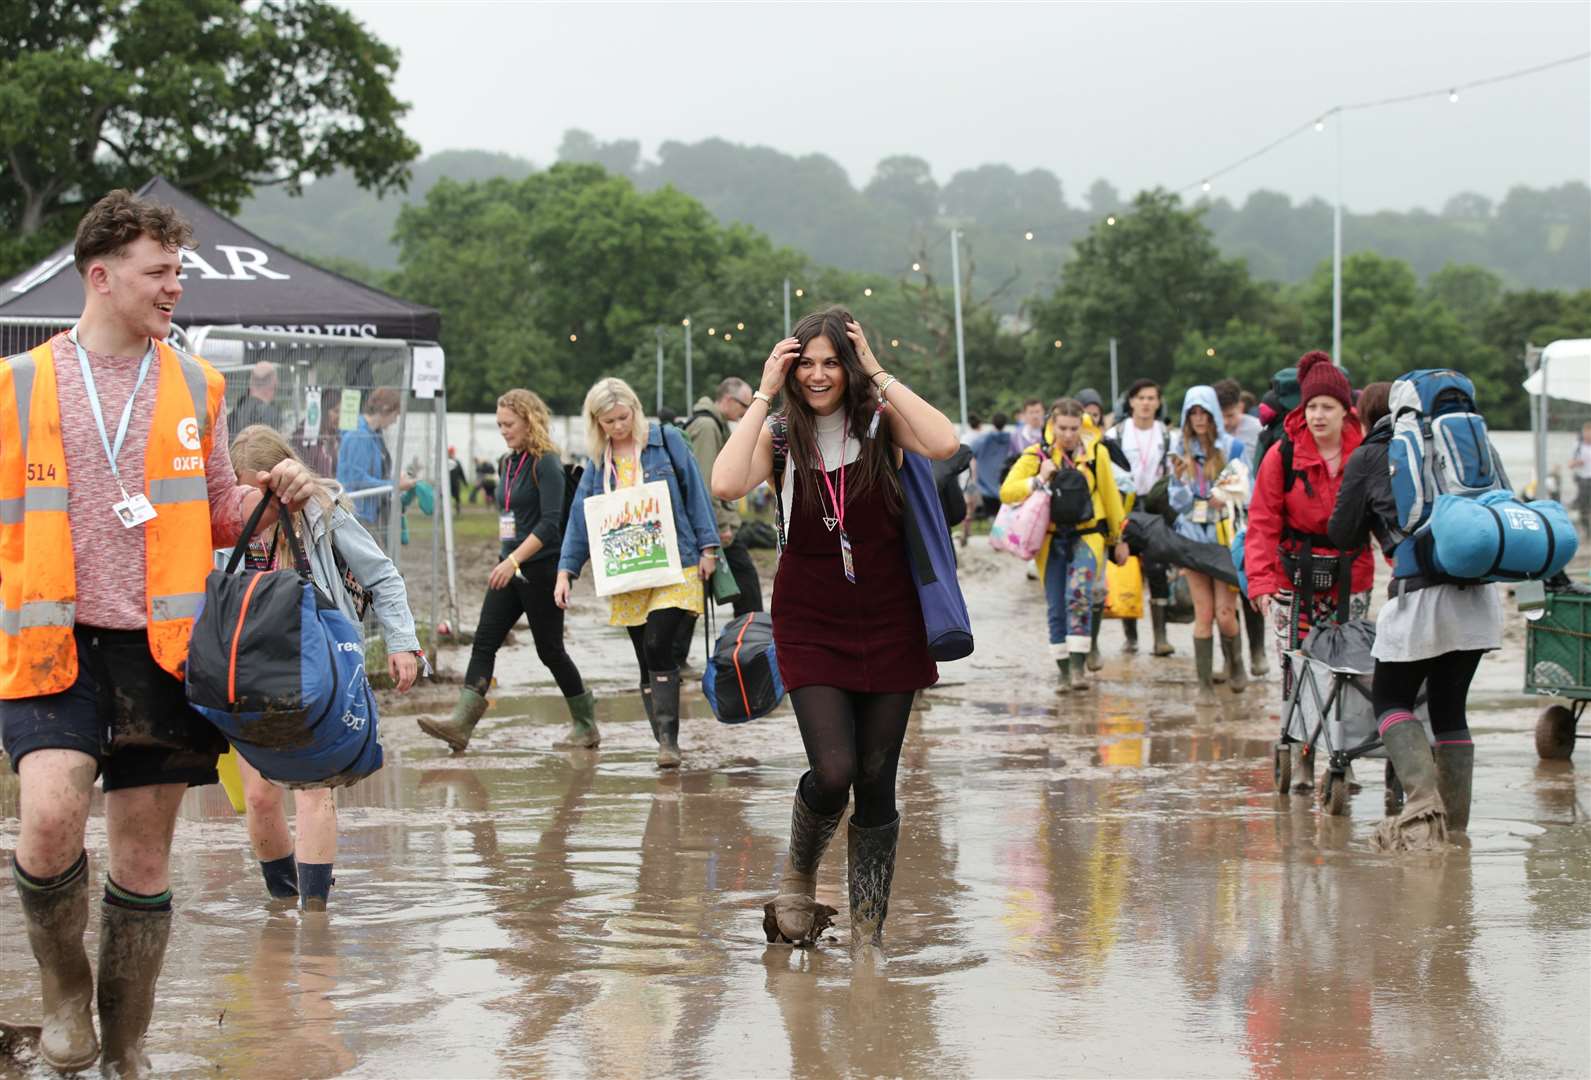 The South West could experience scattered showers as festival-goers arrive at Glastonbury on Wednesday (Yui Mok/PA)